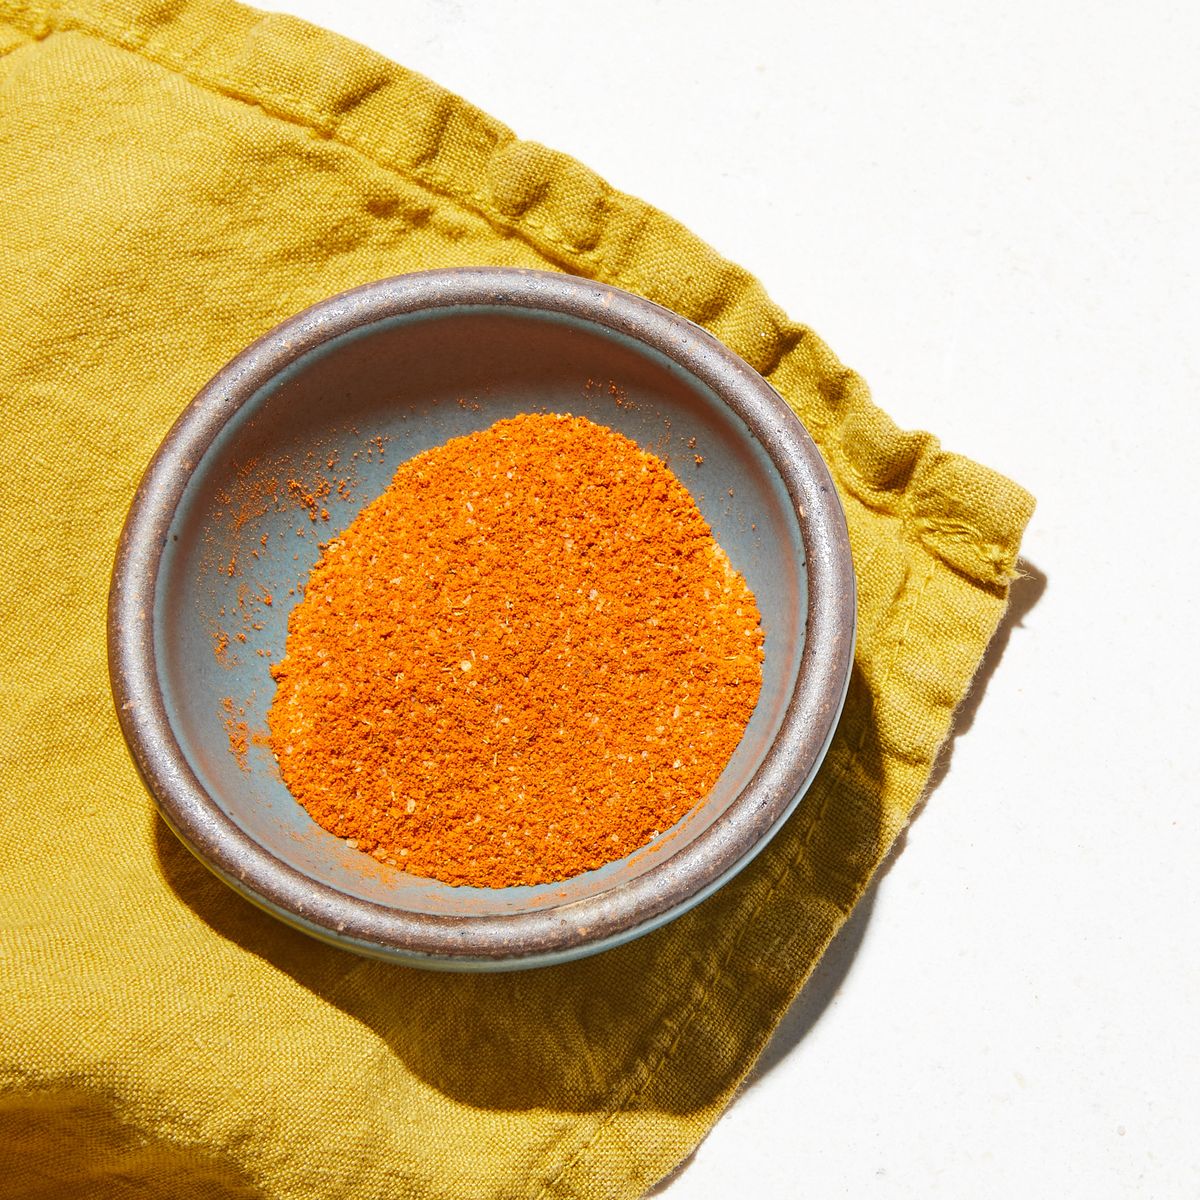 Small bowl full of a vibrant orange spice sitting atop a yellow fabric napkin